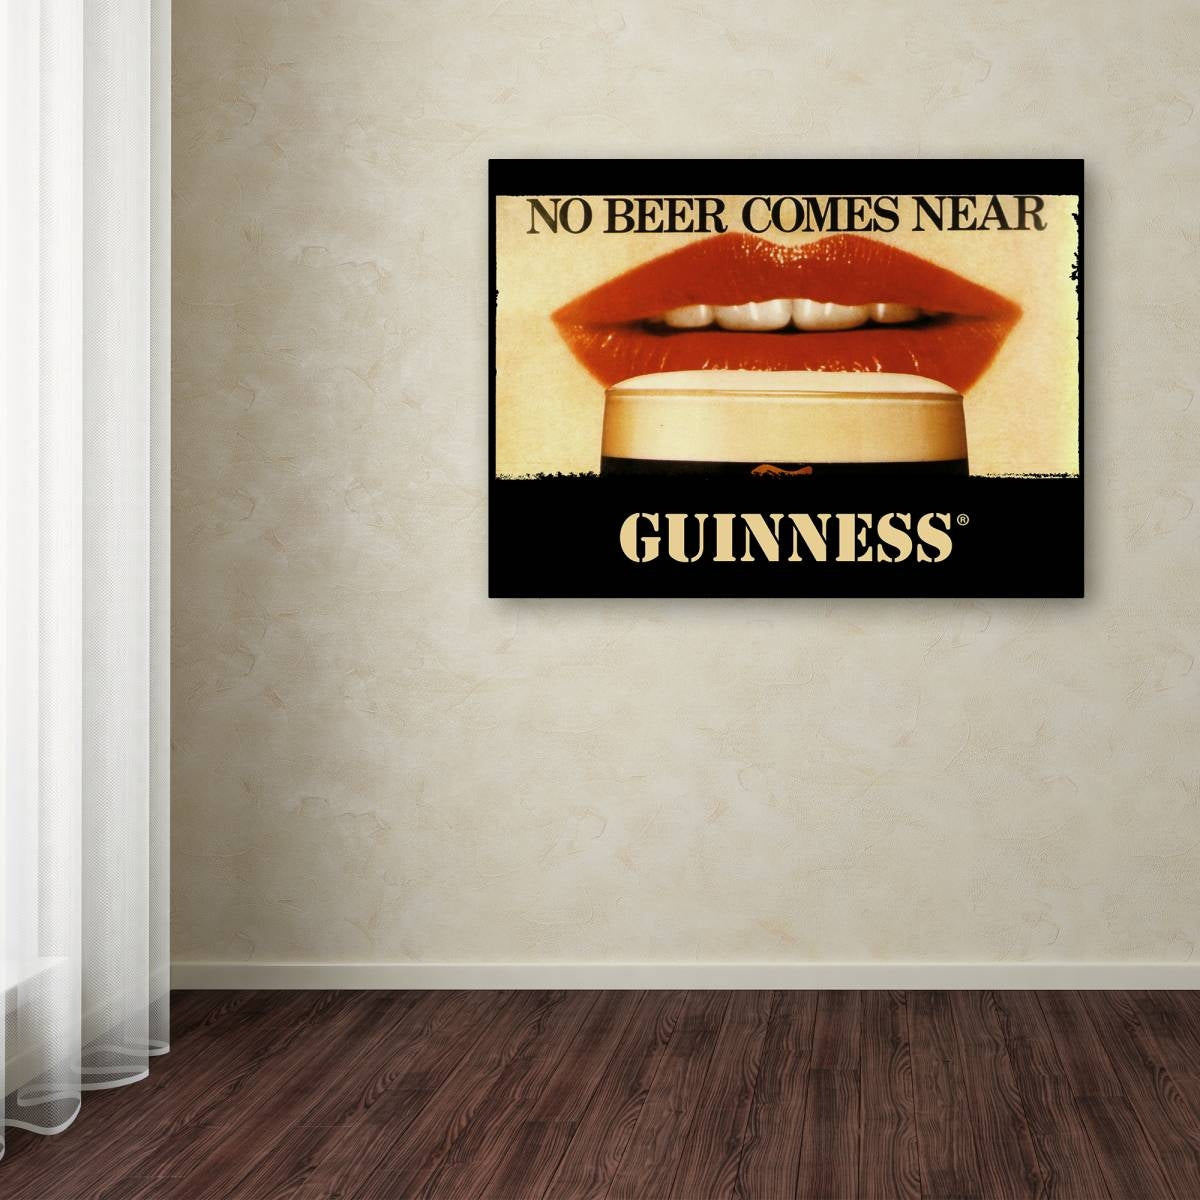 Canvas print featuring Guinness Brewery 'No Beer Comes Near' Canvas Art by Guinness.